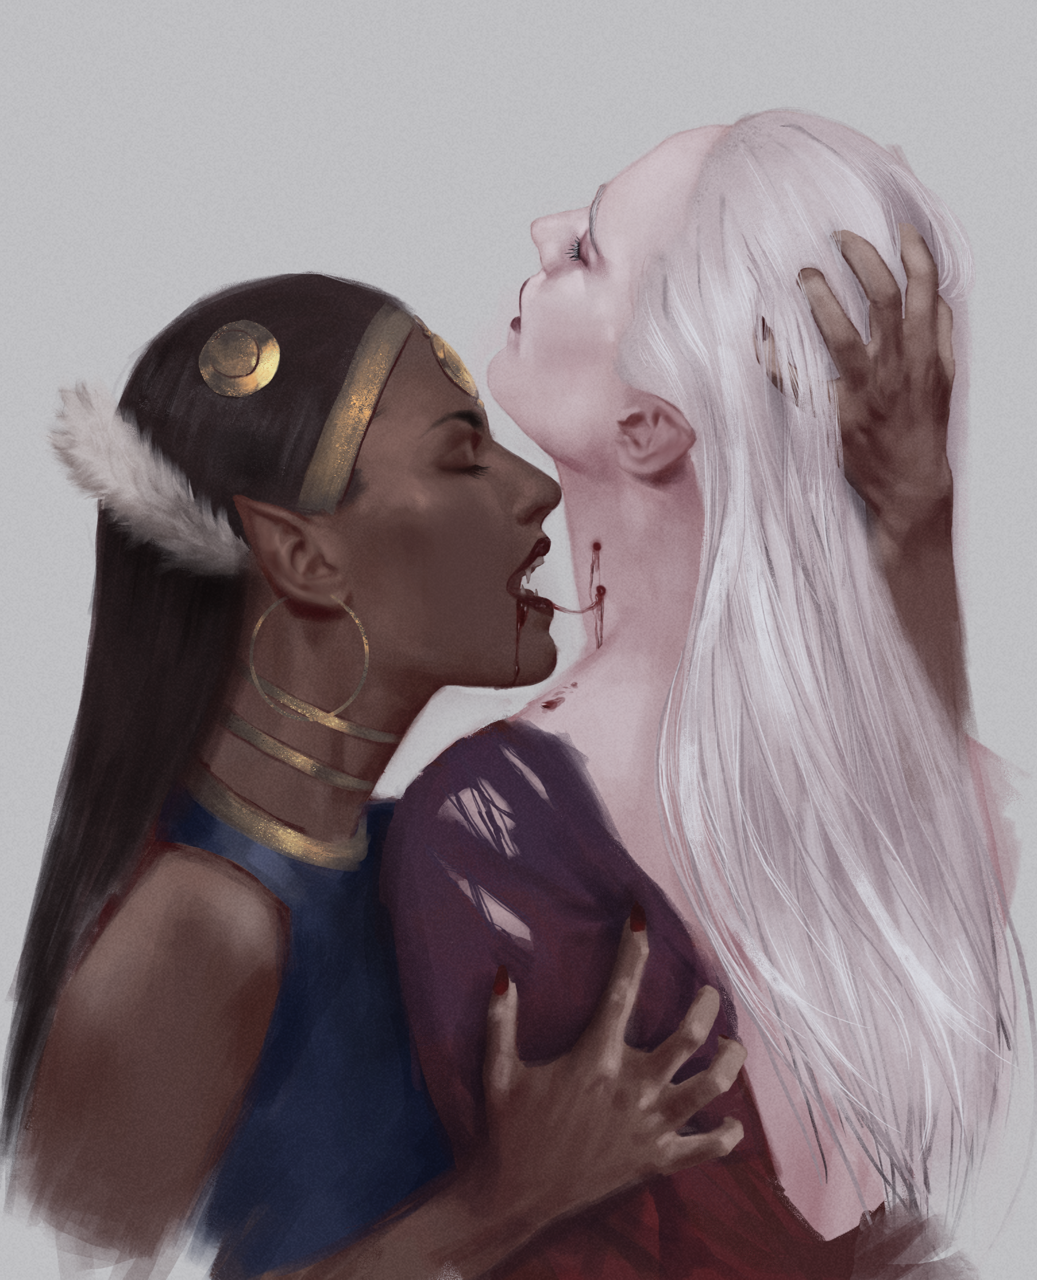 atutcha: ‪Carmilla and …. I don’t know her name yet but i’m already obsessed 🧛🏾‍♀️🧛🏻‍♀️give me her name so i can also make a ship name‬ 